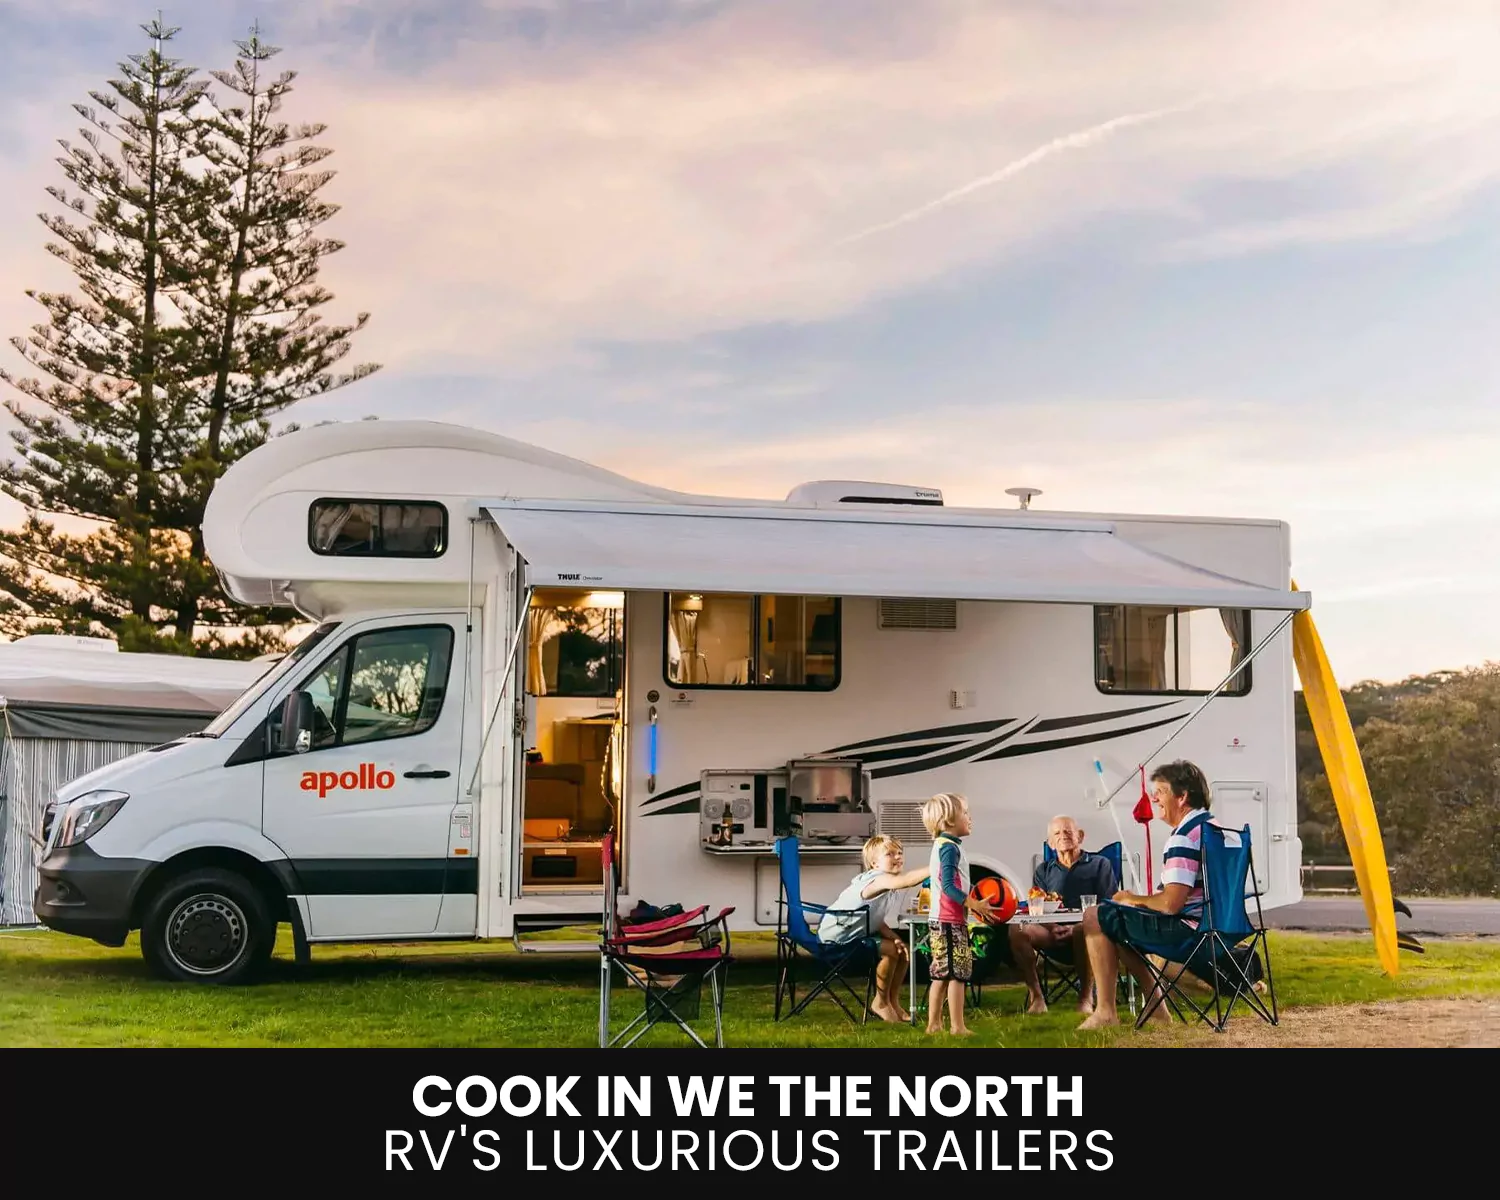 Cook In We The North RV's Luxurious Trailers!